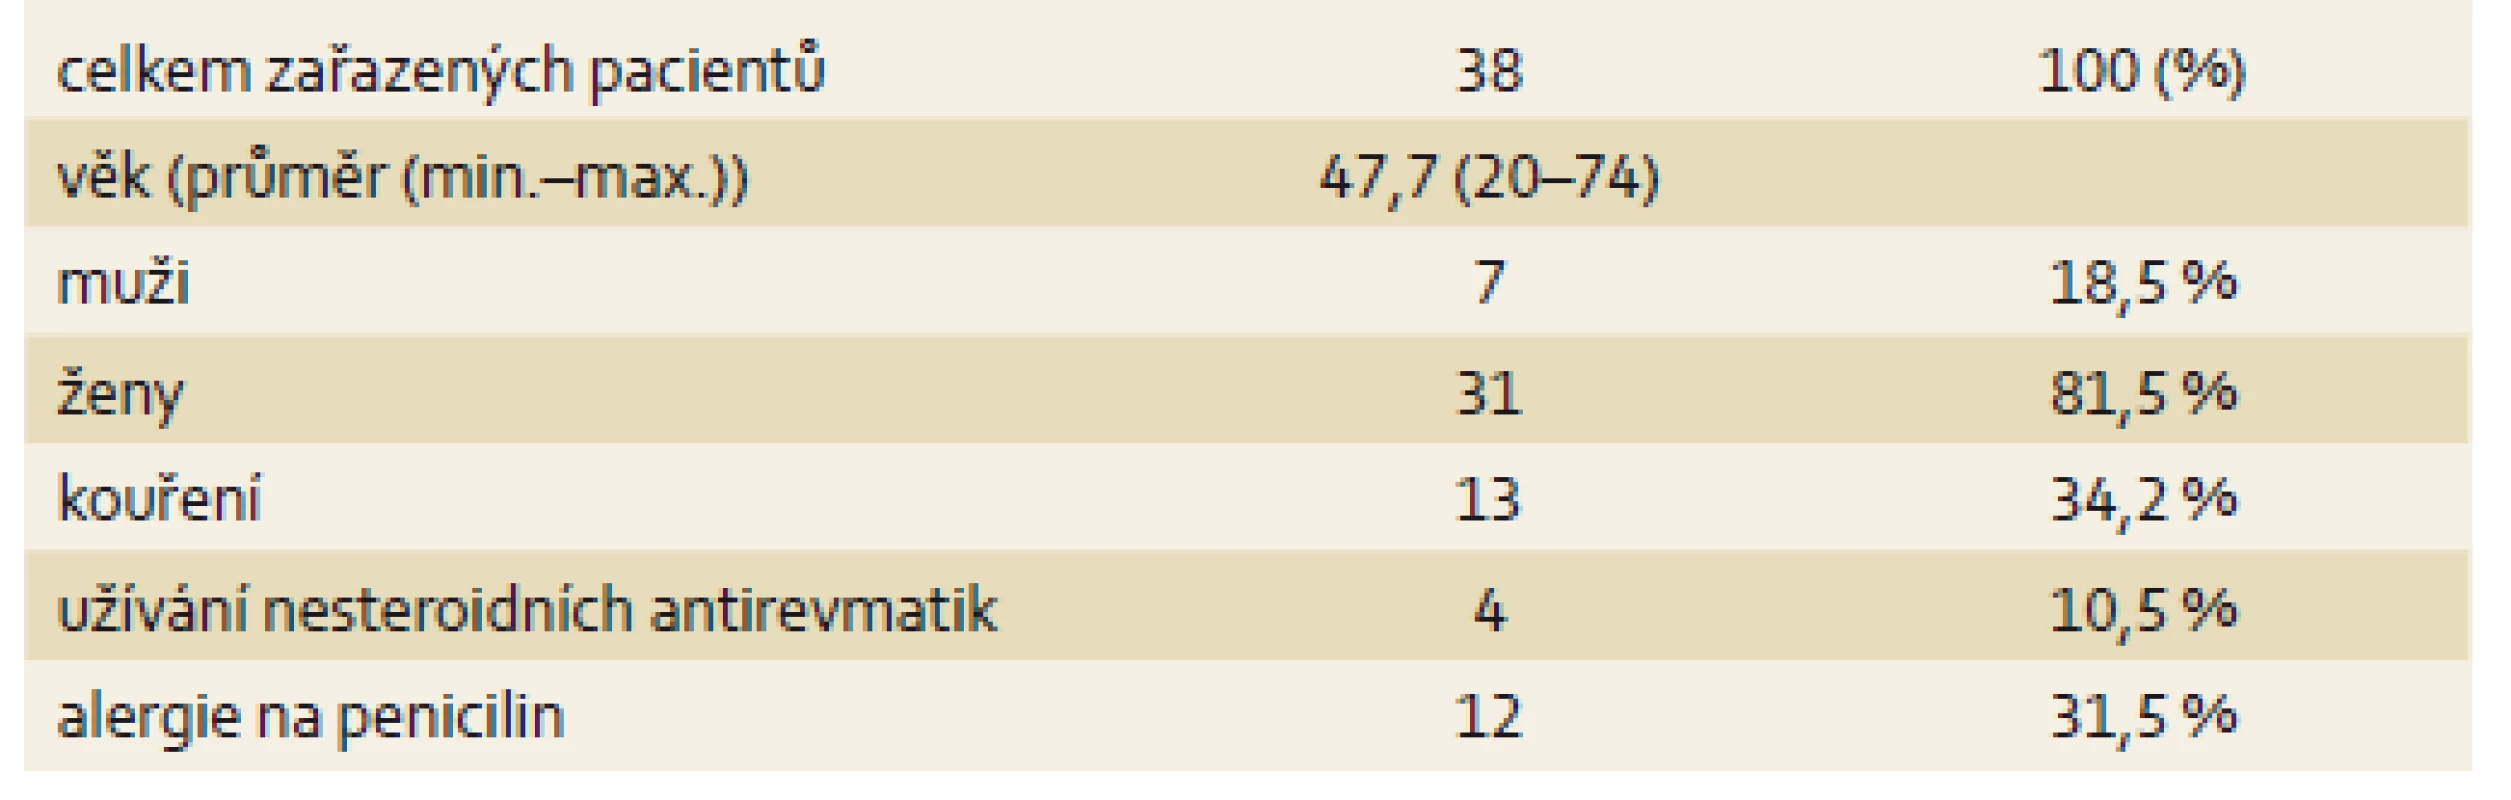 Charakteristika souboru pacientů.
Tab. 1. Characteristics of patients included in the study.